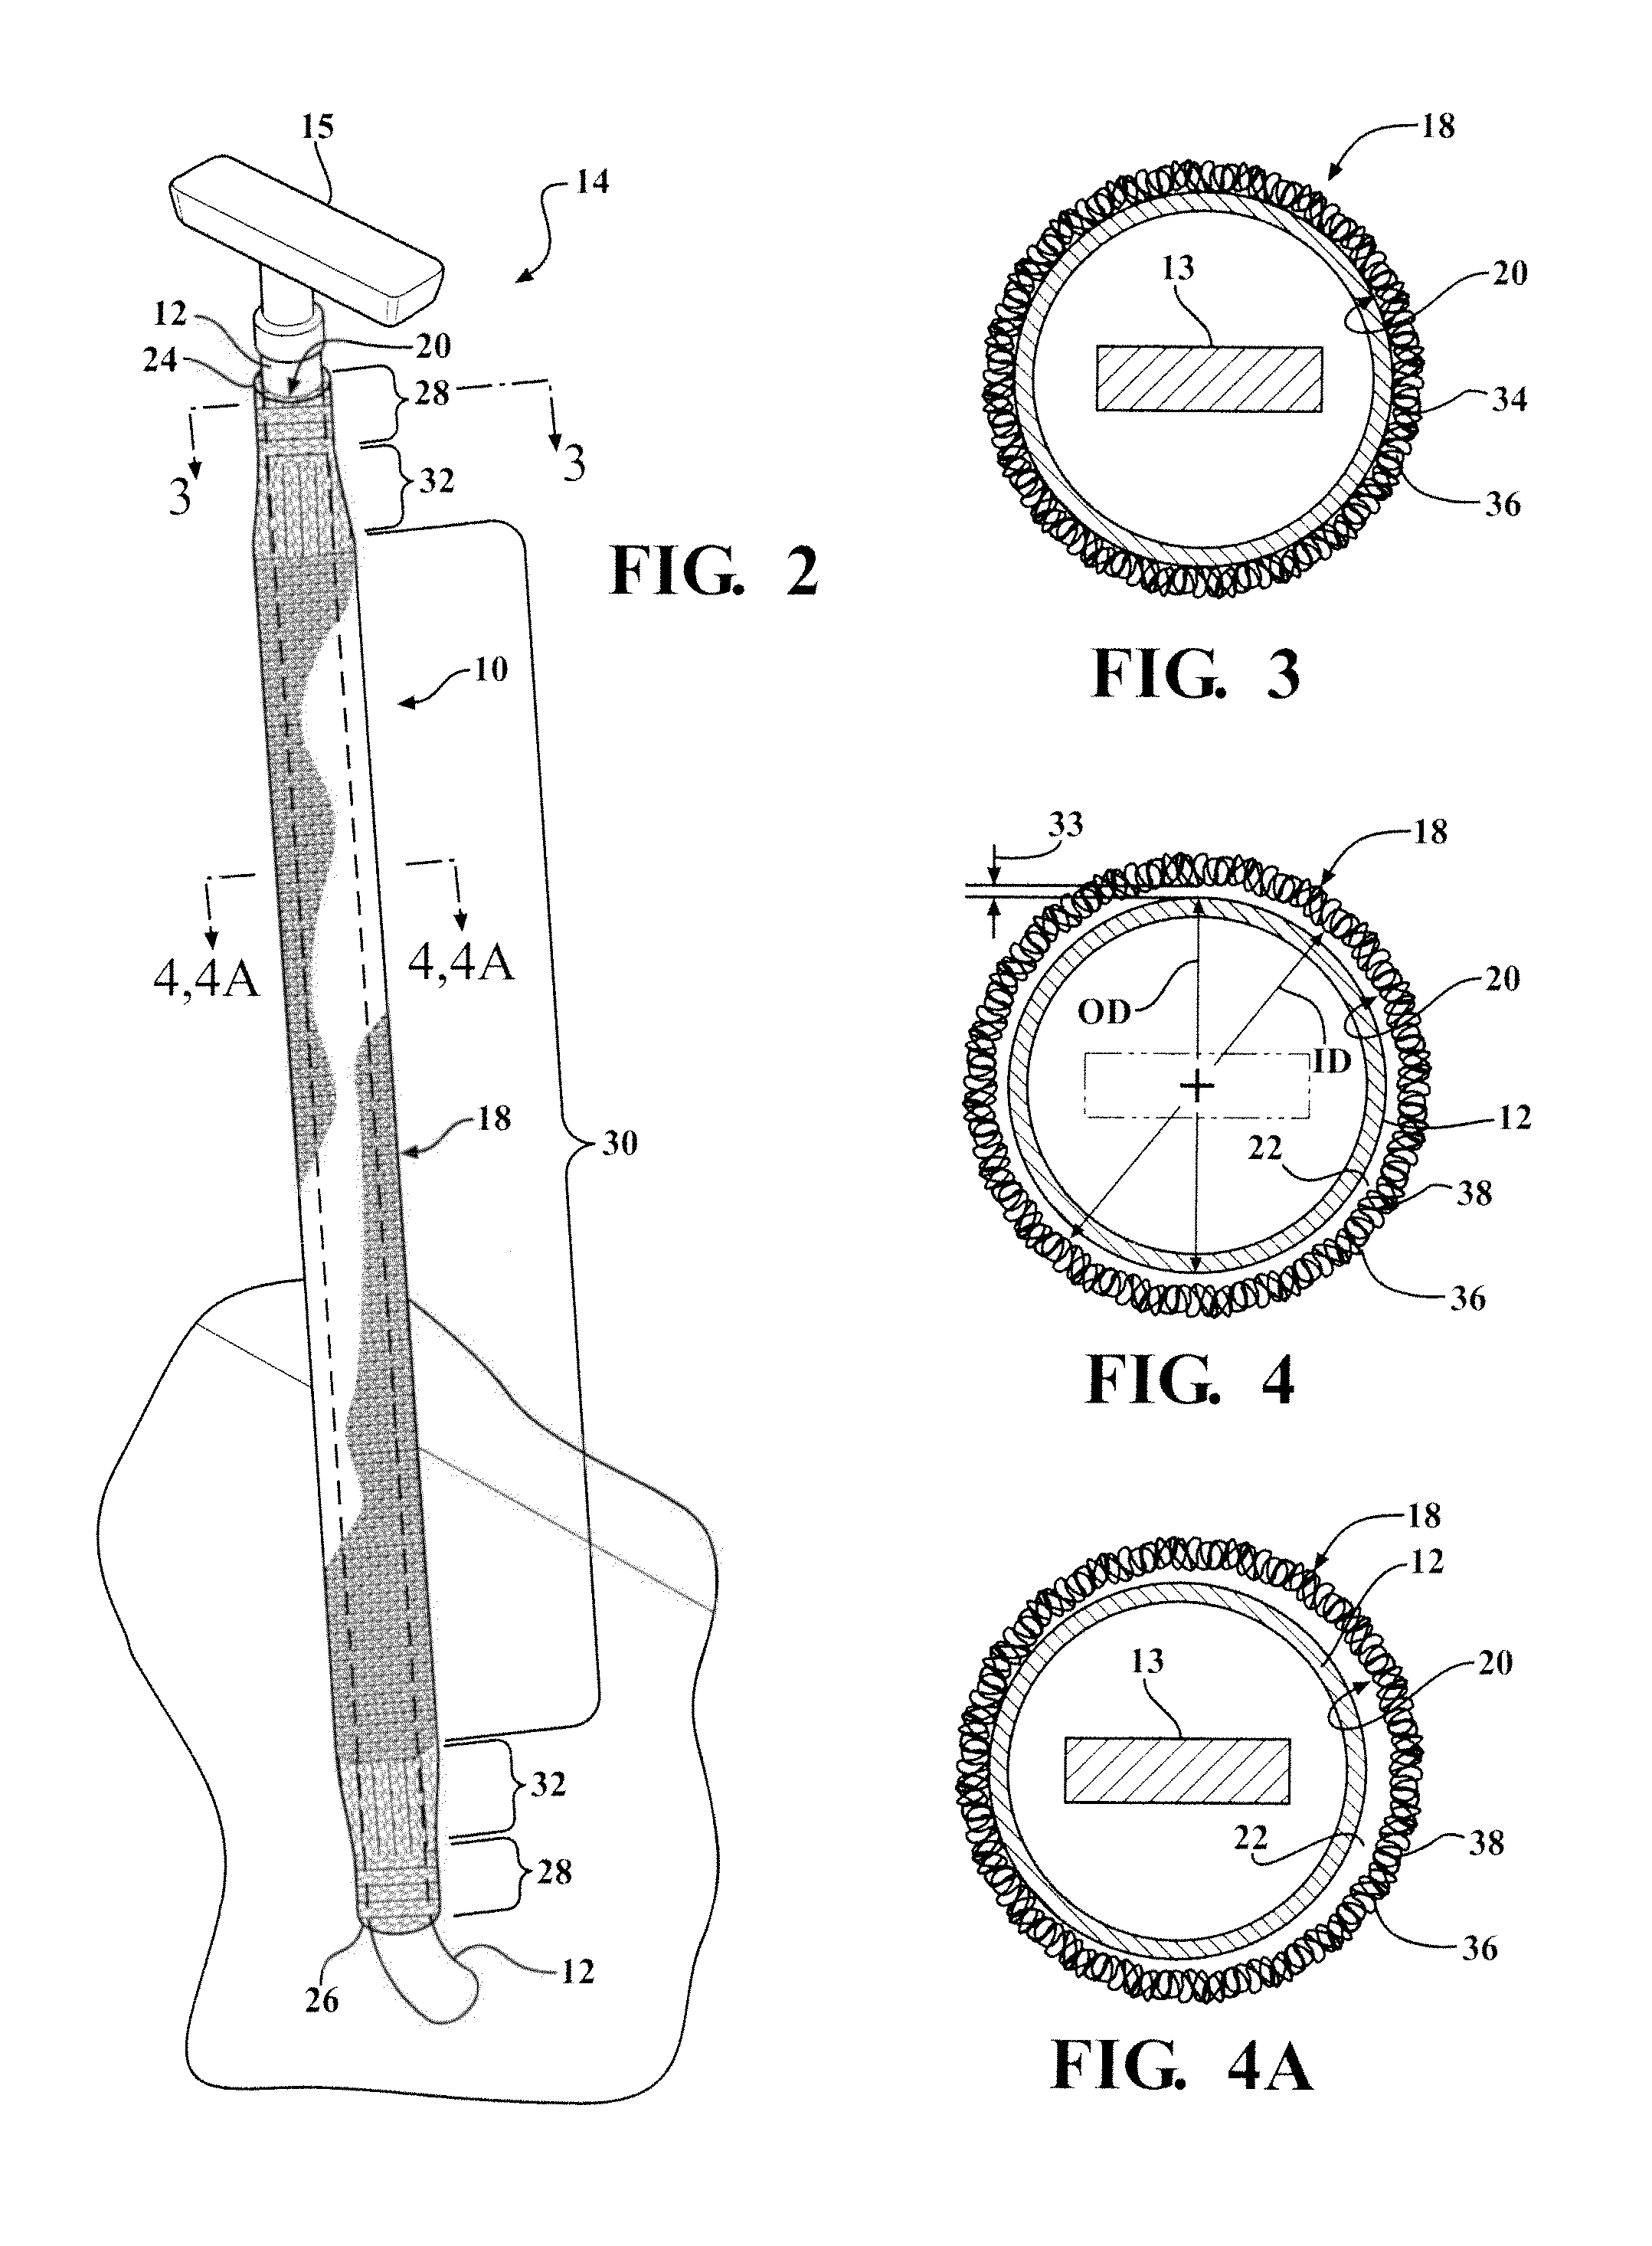 Knit sleeve for an oil dip stick tube, combination thereof, method of construction thereof and method of dampening the vibration of an oil dip stick tube